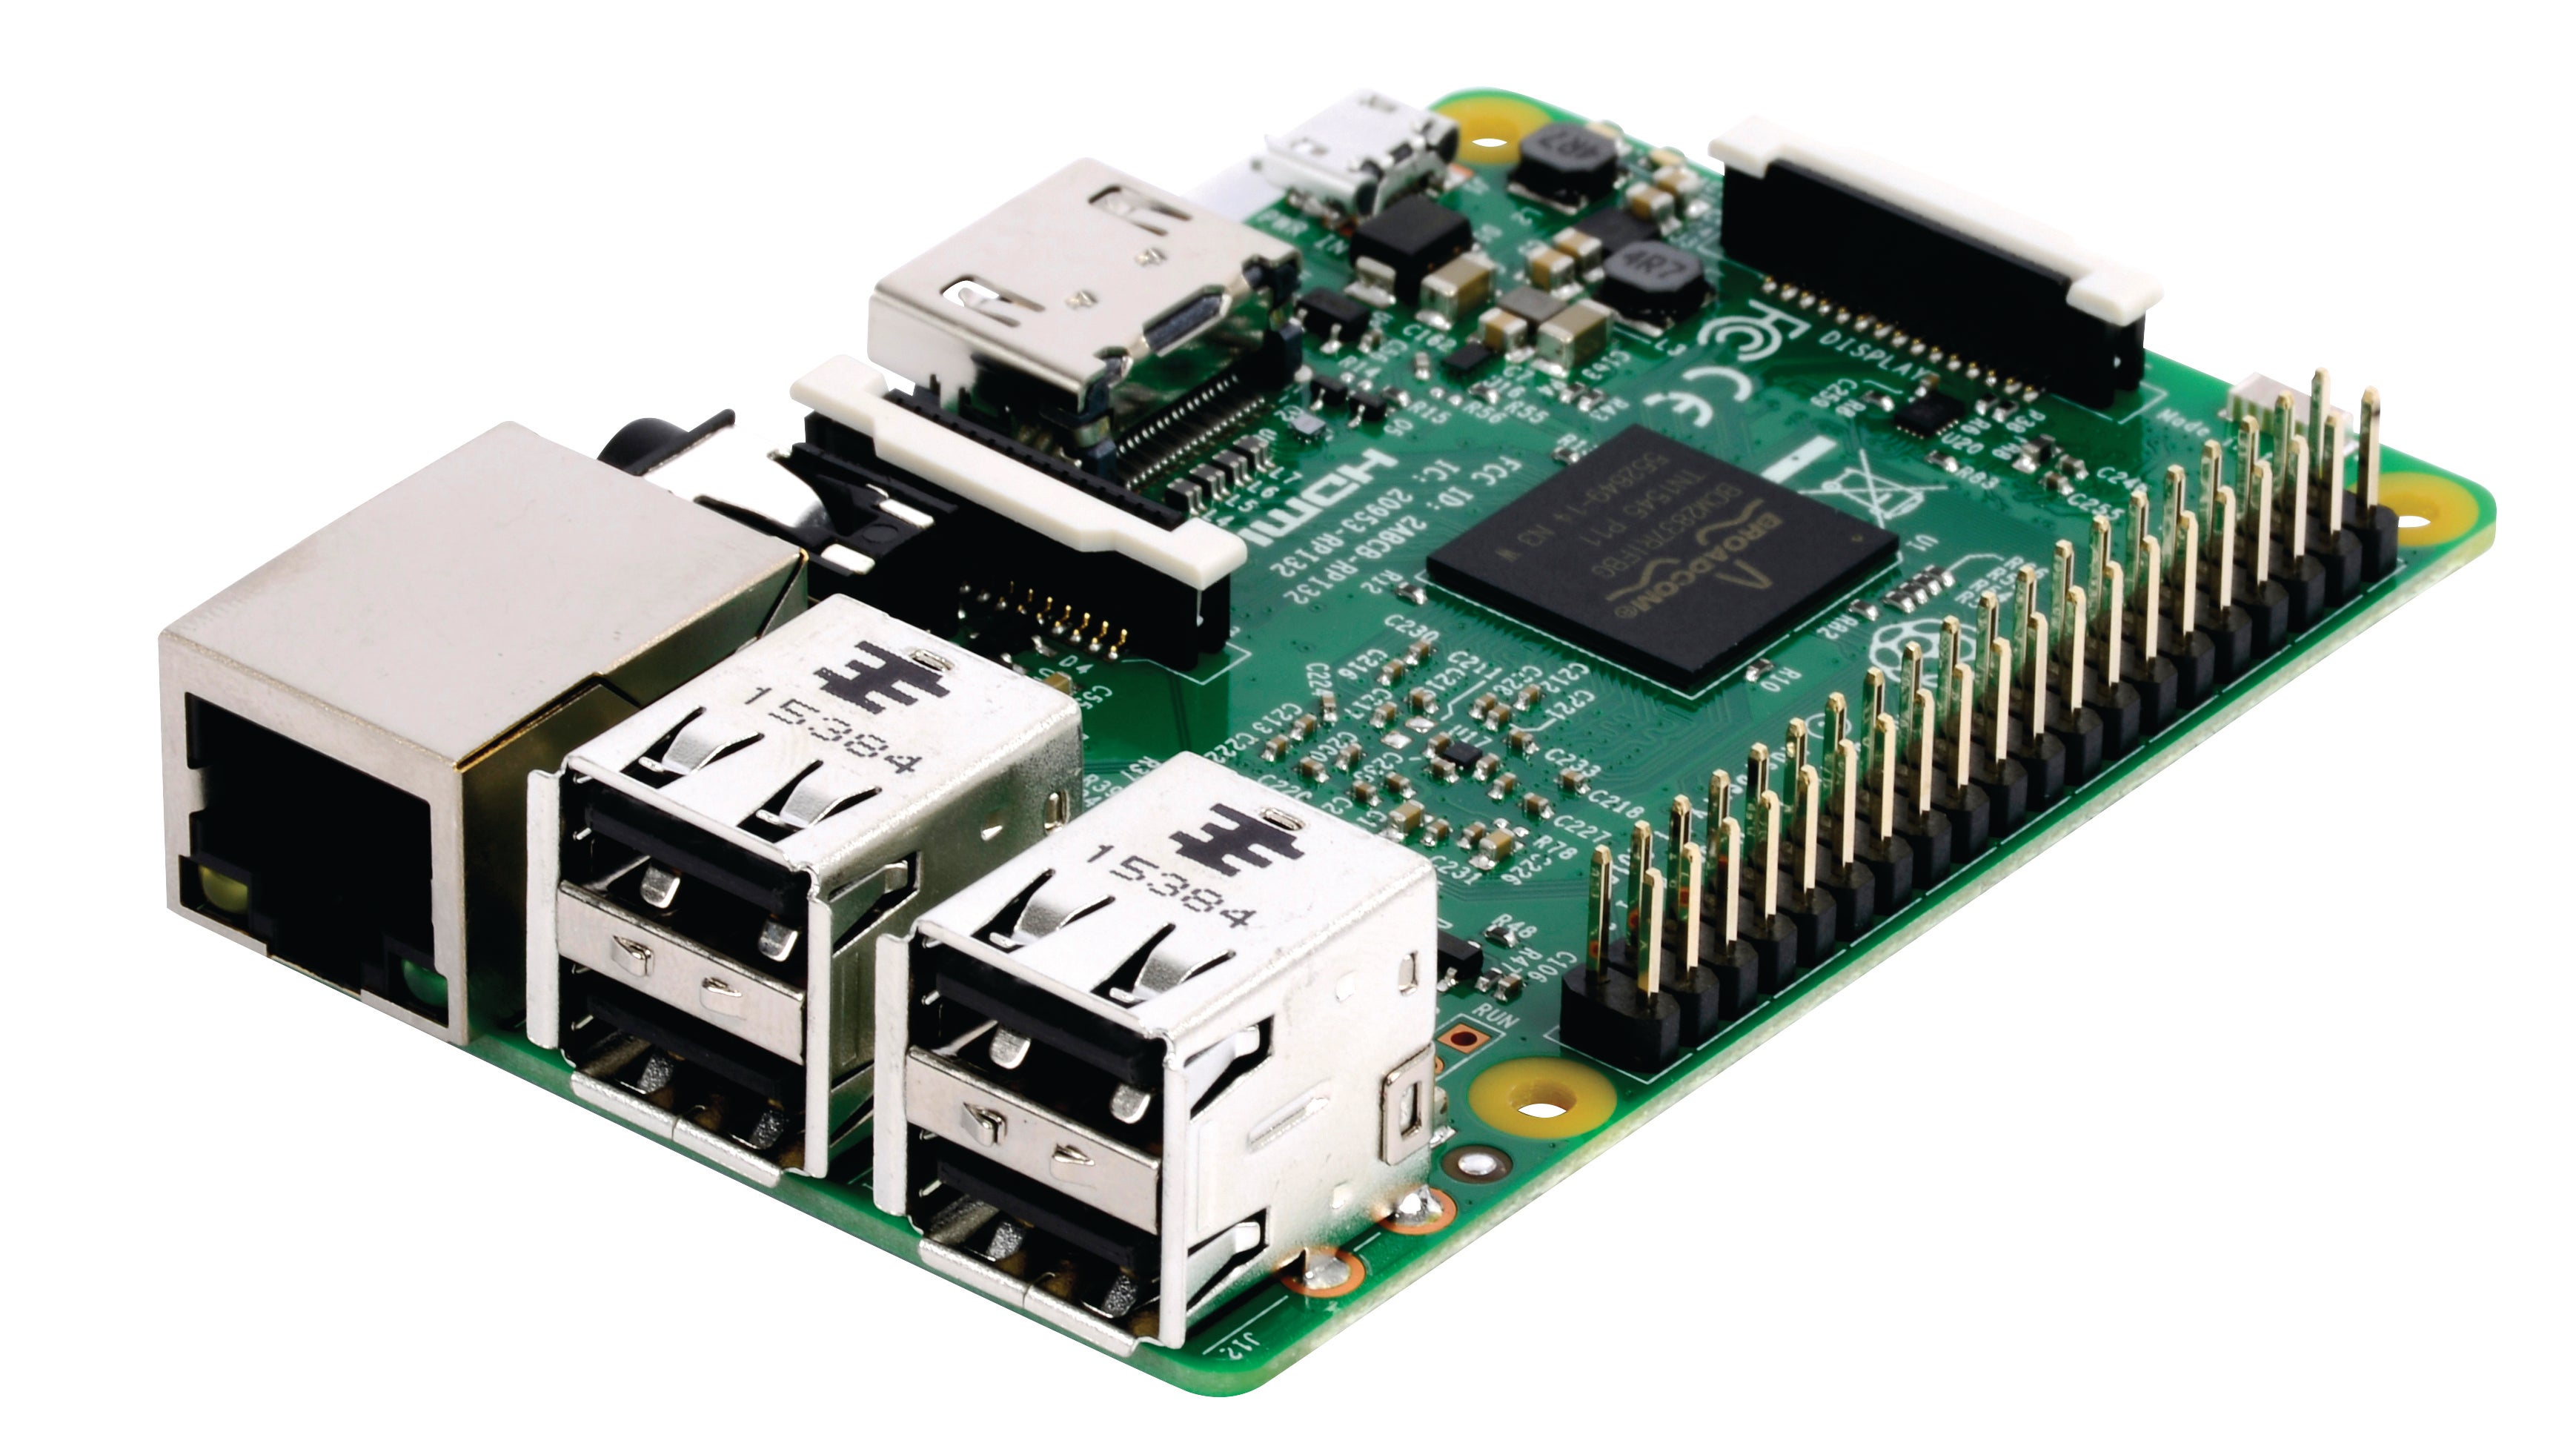 Raspberry Pi 3 review: Still the ultimate hobbyist computer